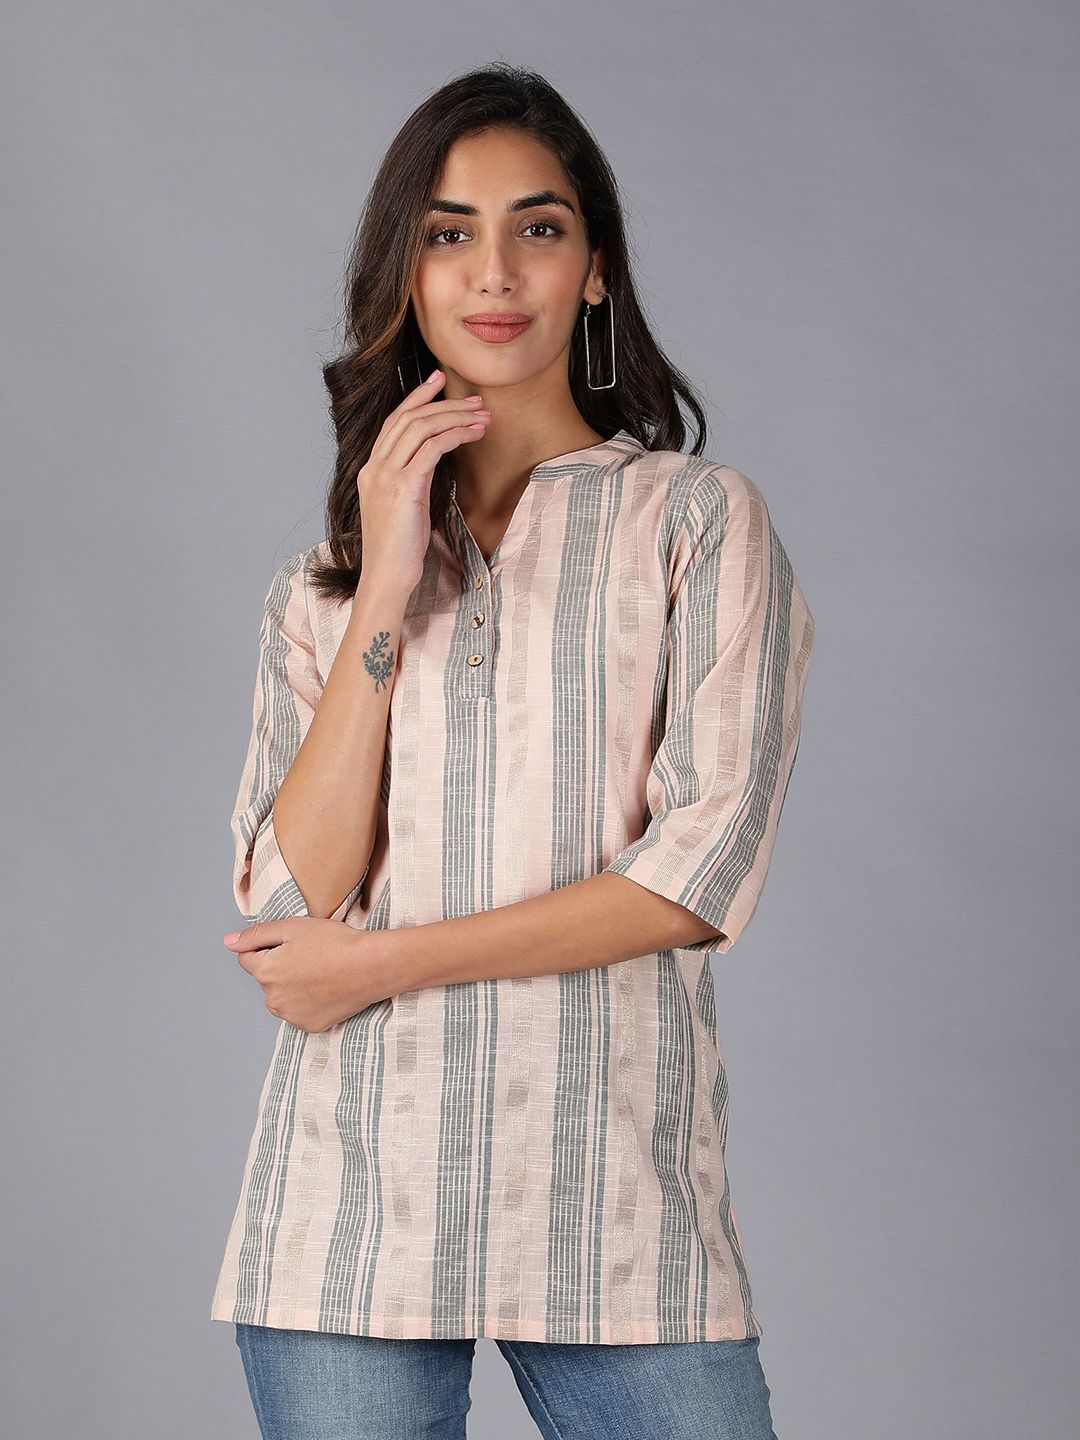 Cot'N Soft Striped Pure Cotton Dobby Handloom Kurti Price in India